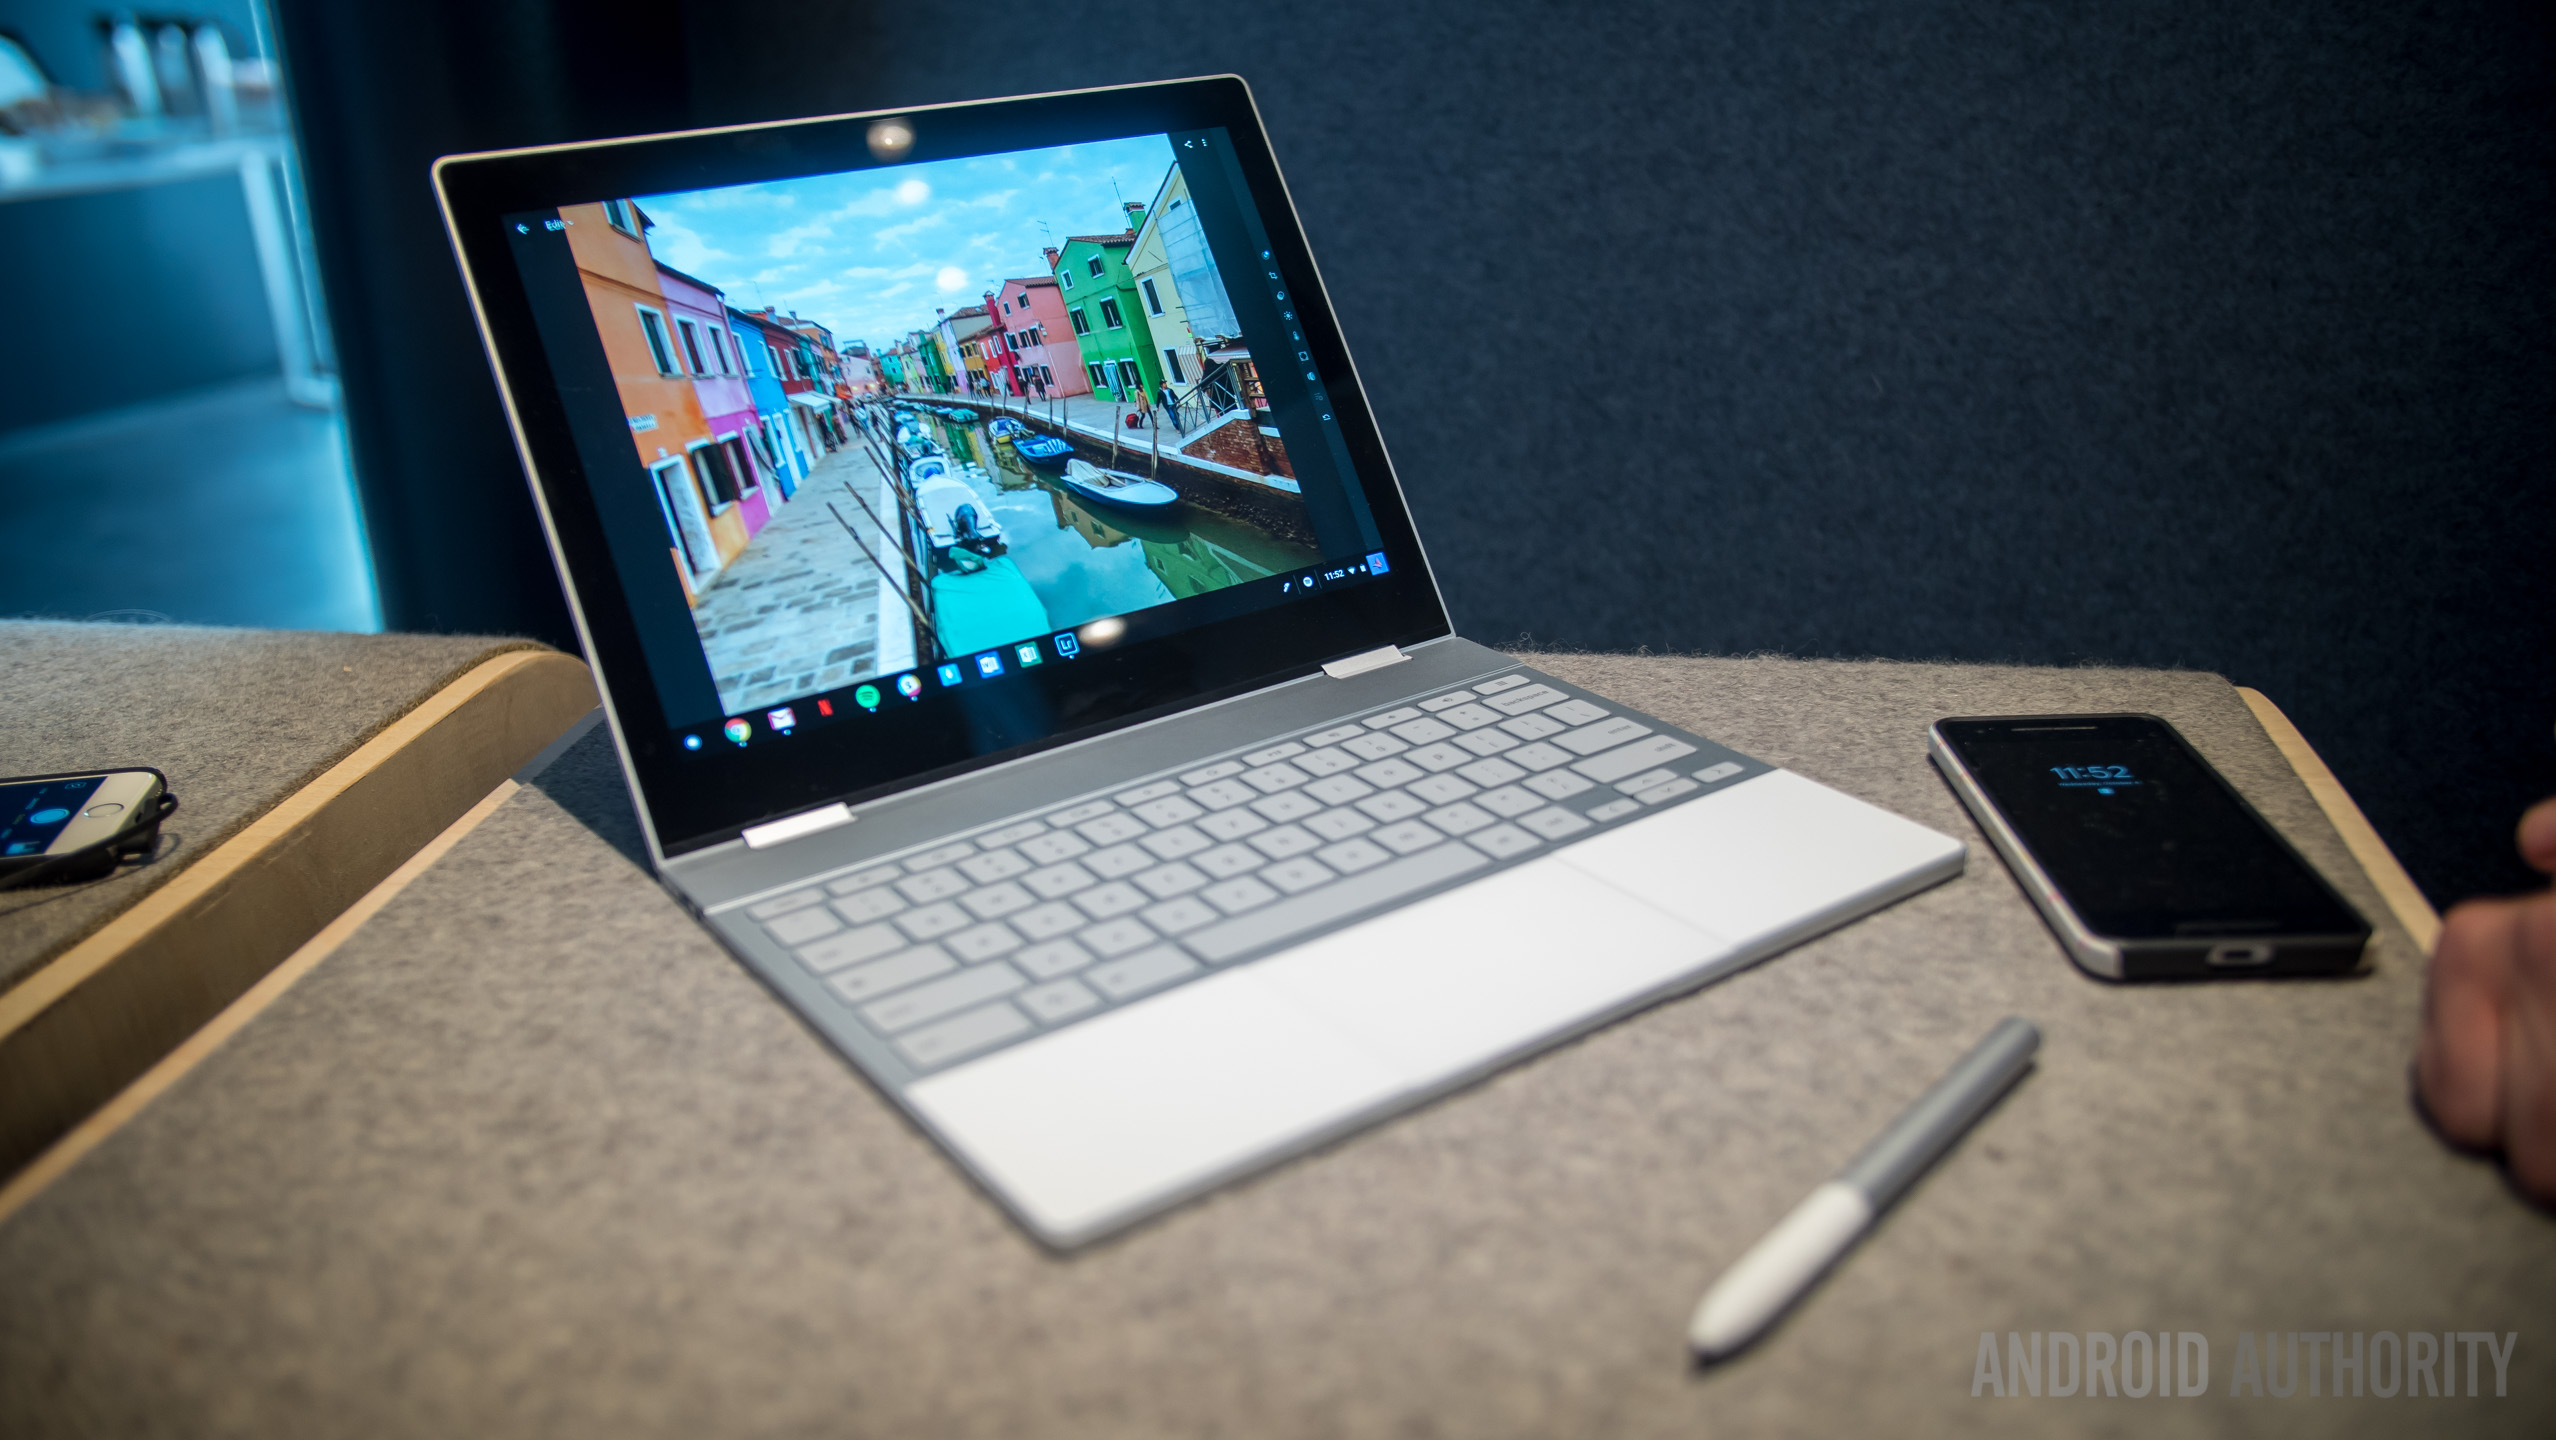 An image of the Google PIxelbook.